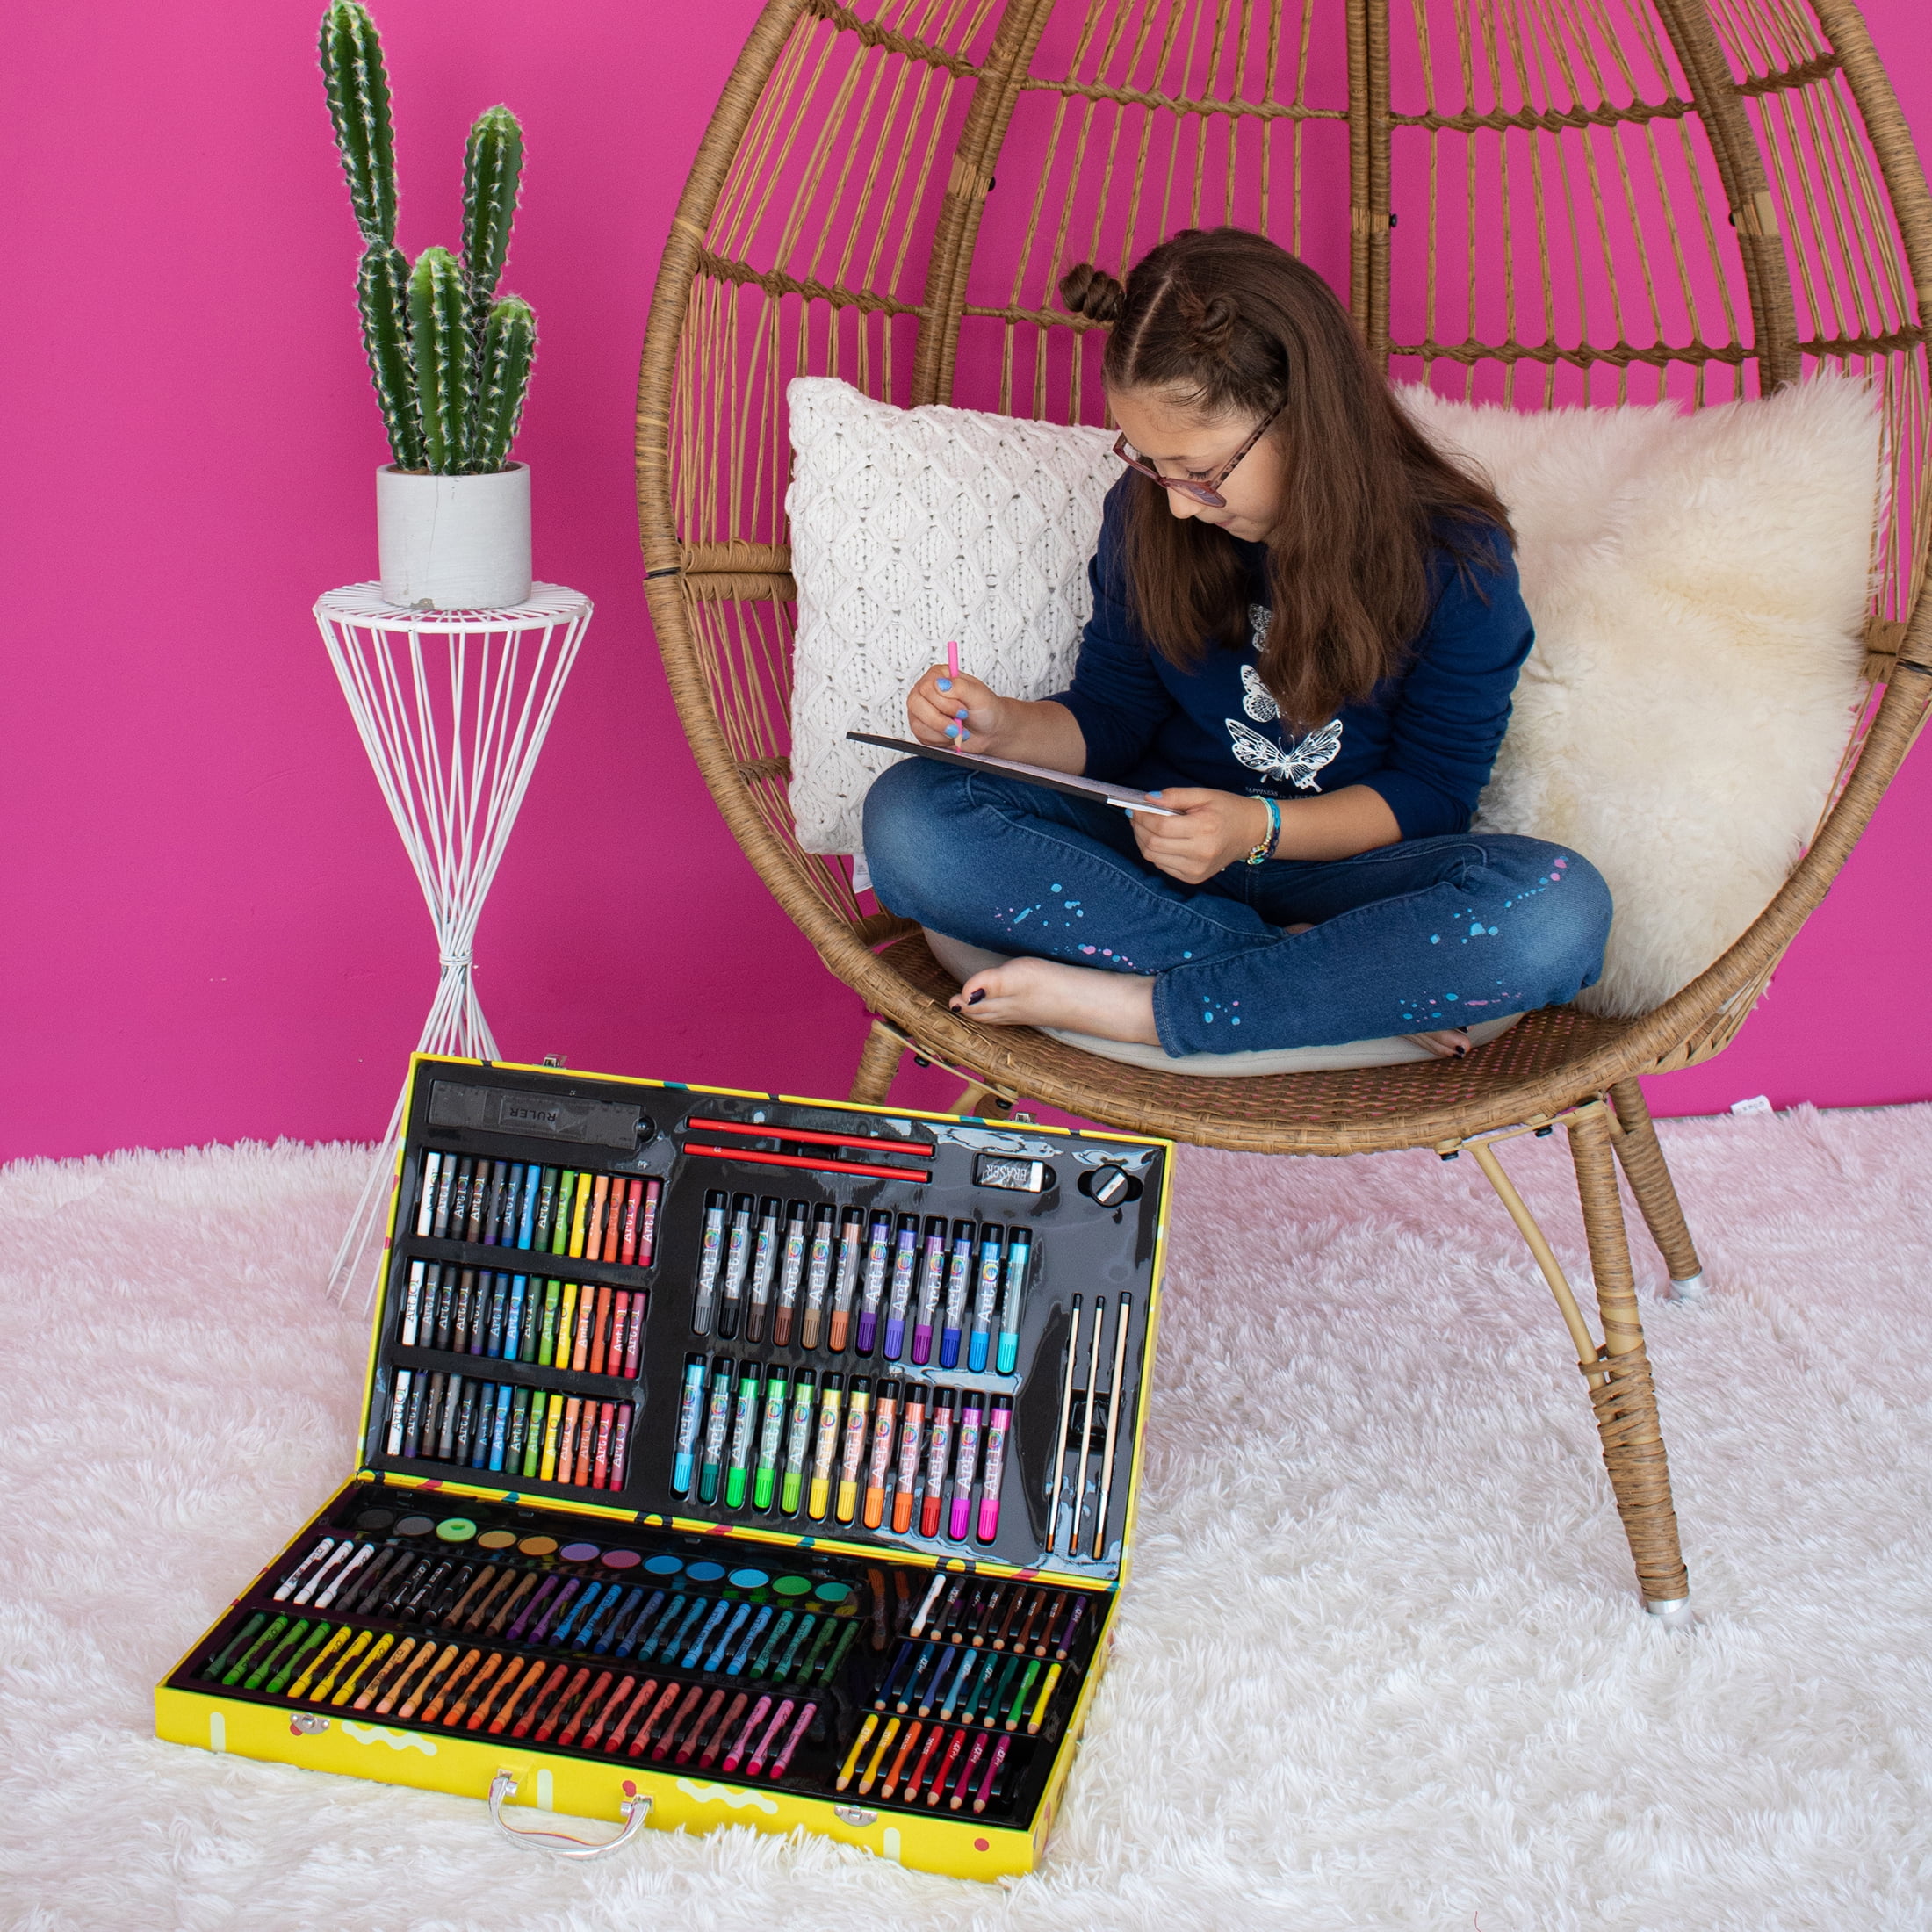 Have a budding artist at home? This kids' art nook is the perfect